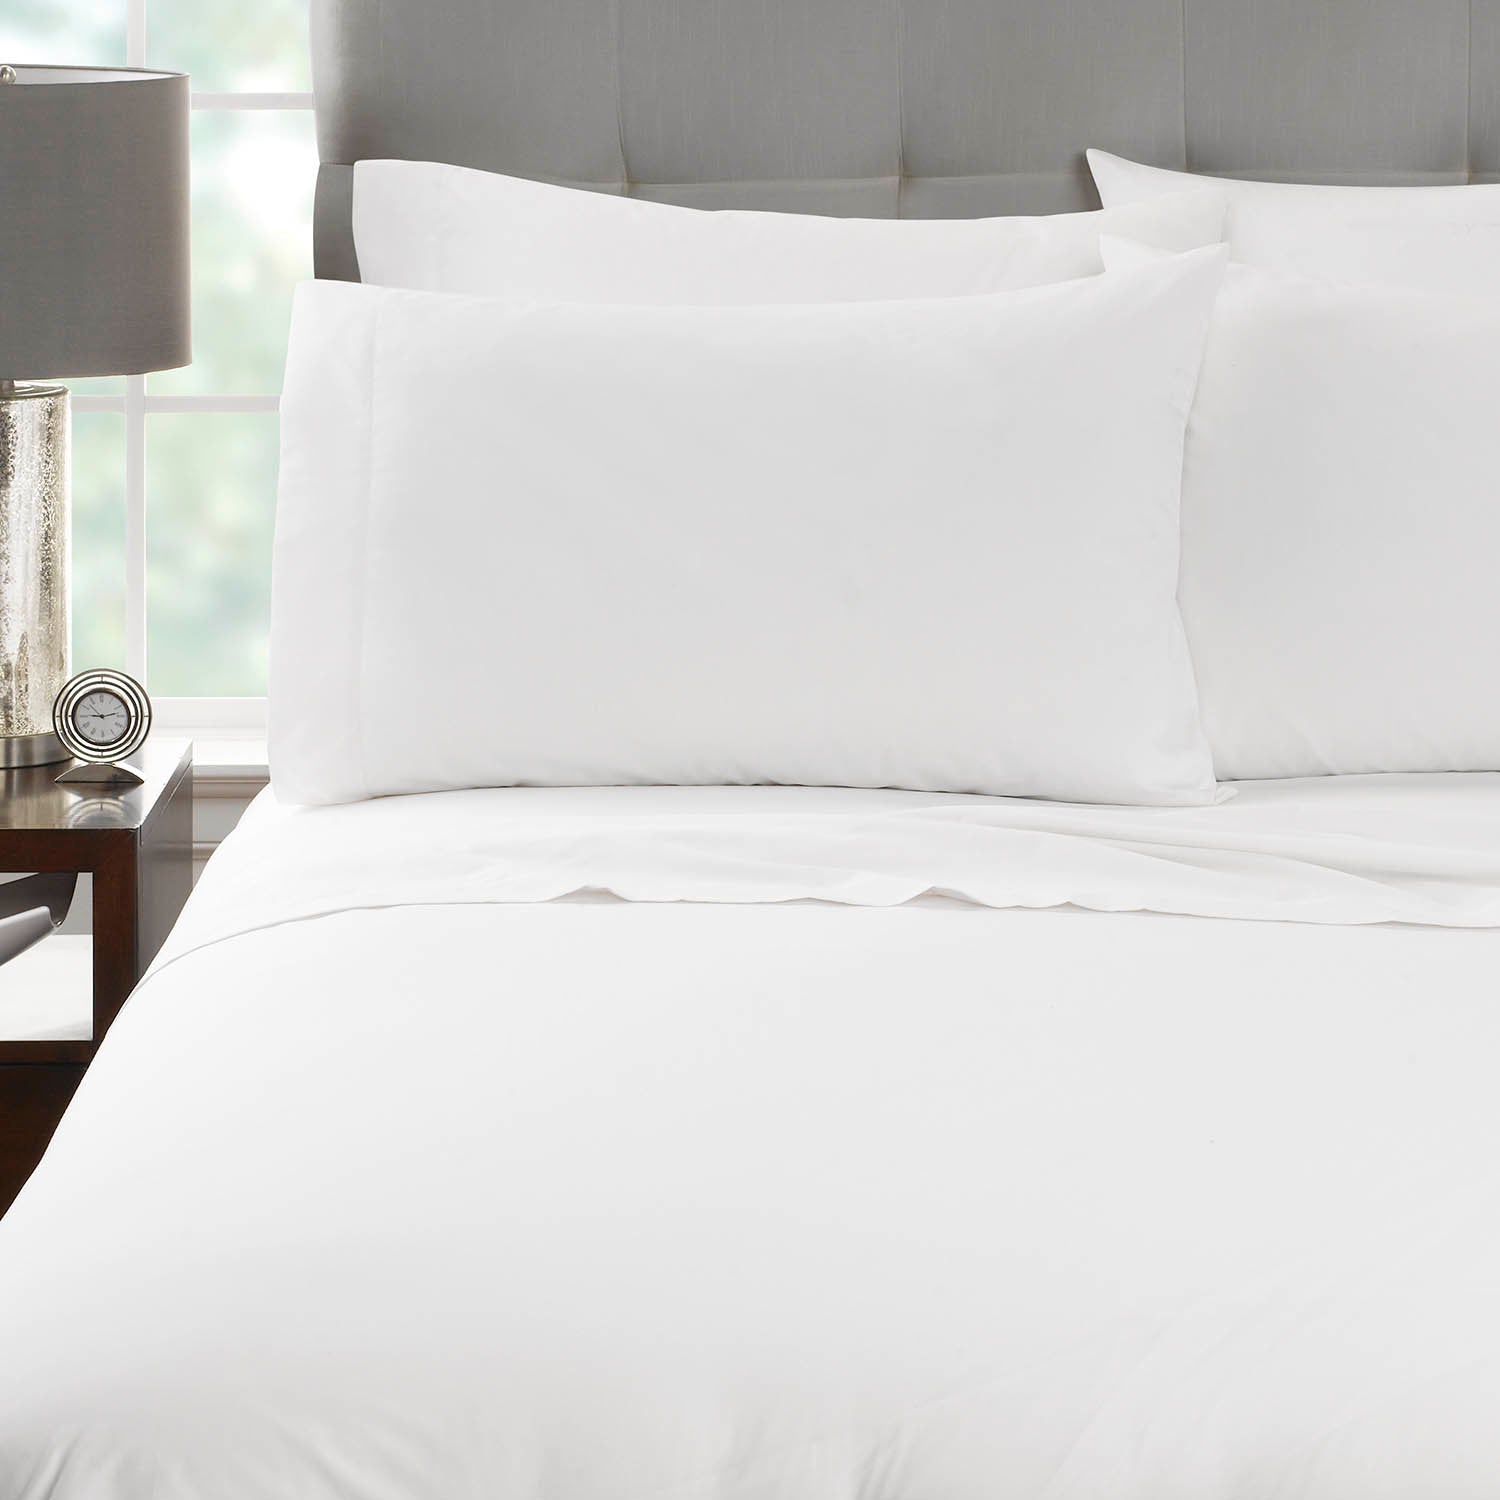 Best Linens  Wholesale linens, Hotel Sheets, Towels, and More l Best  quality across Canada